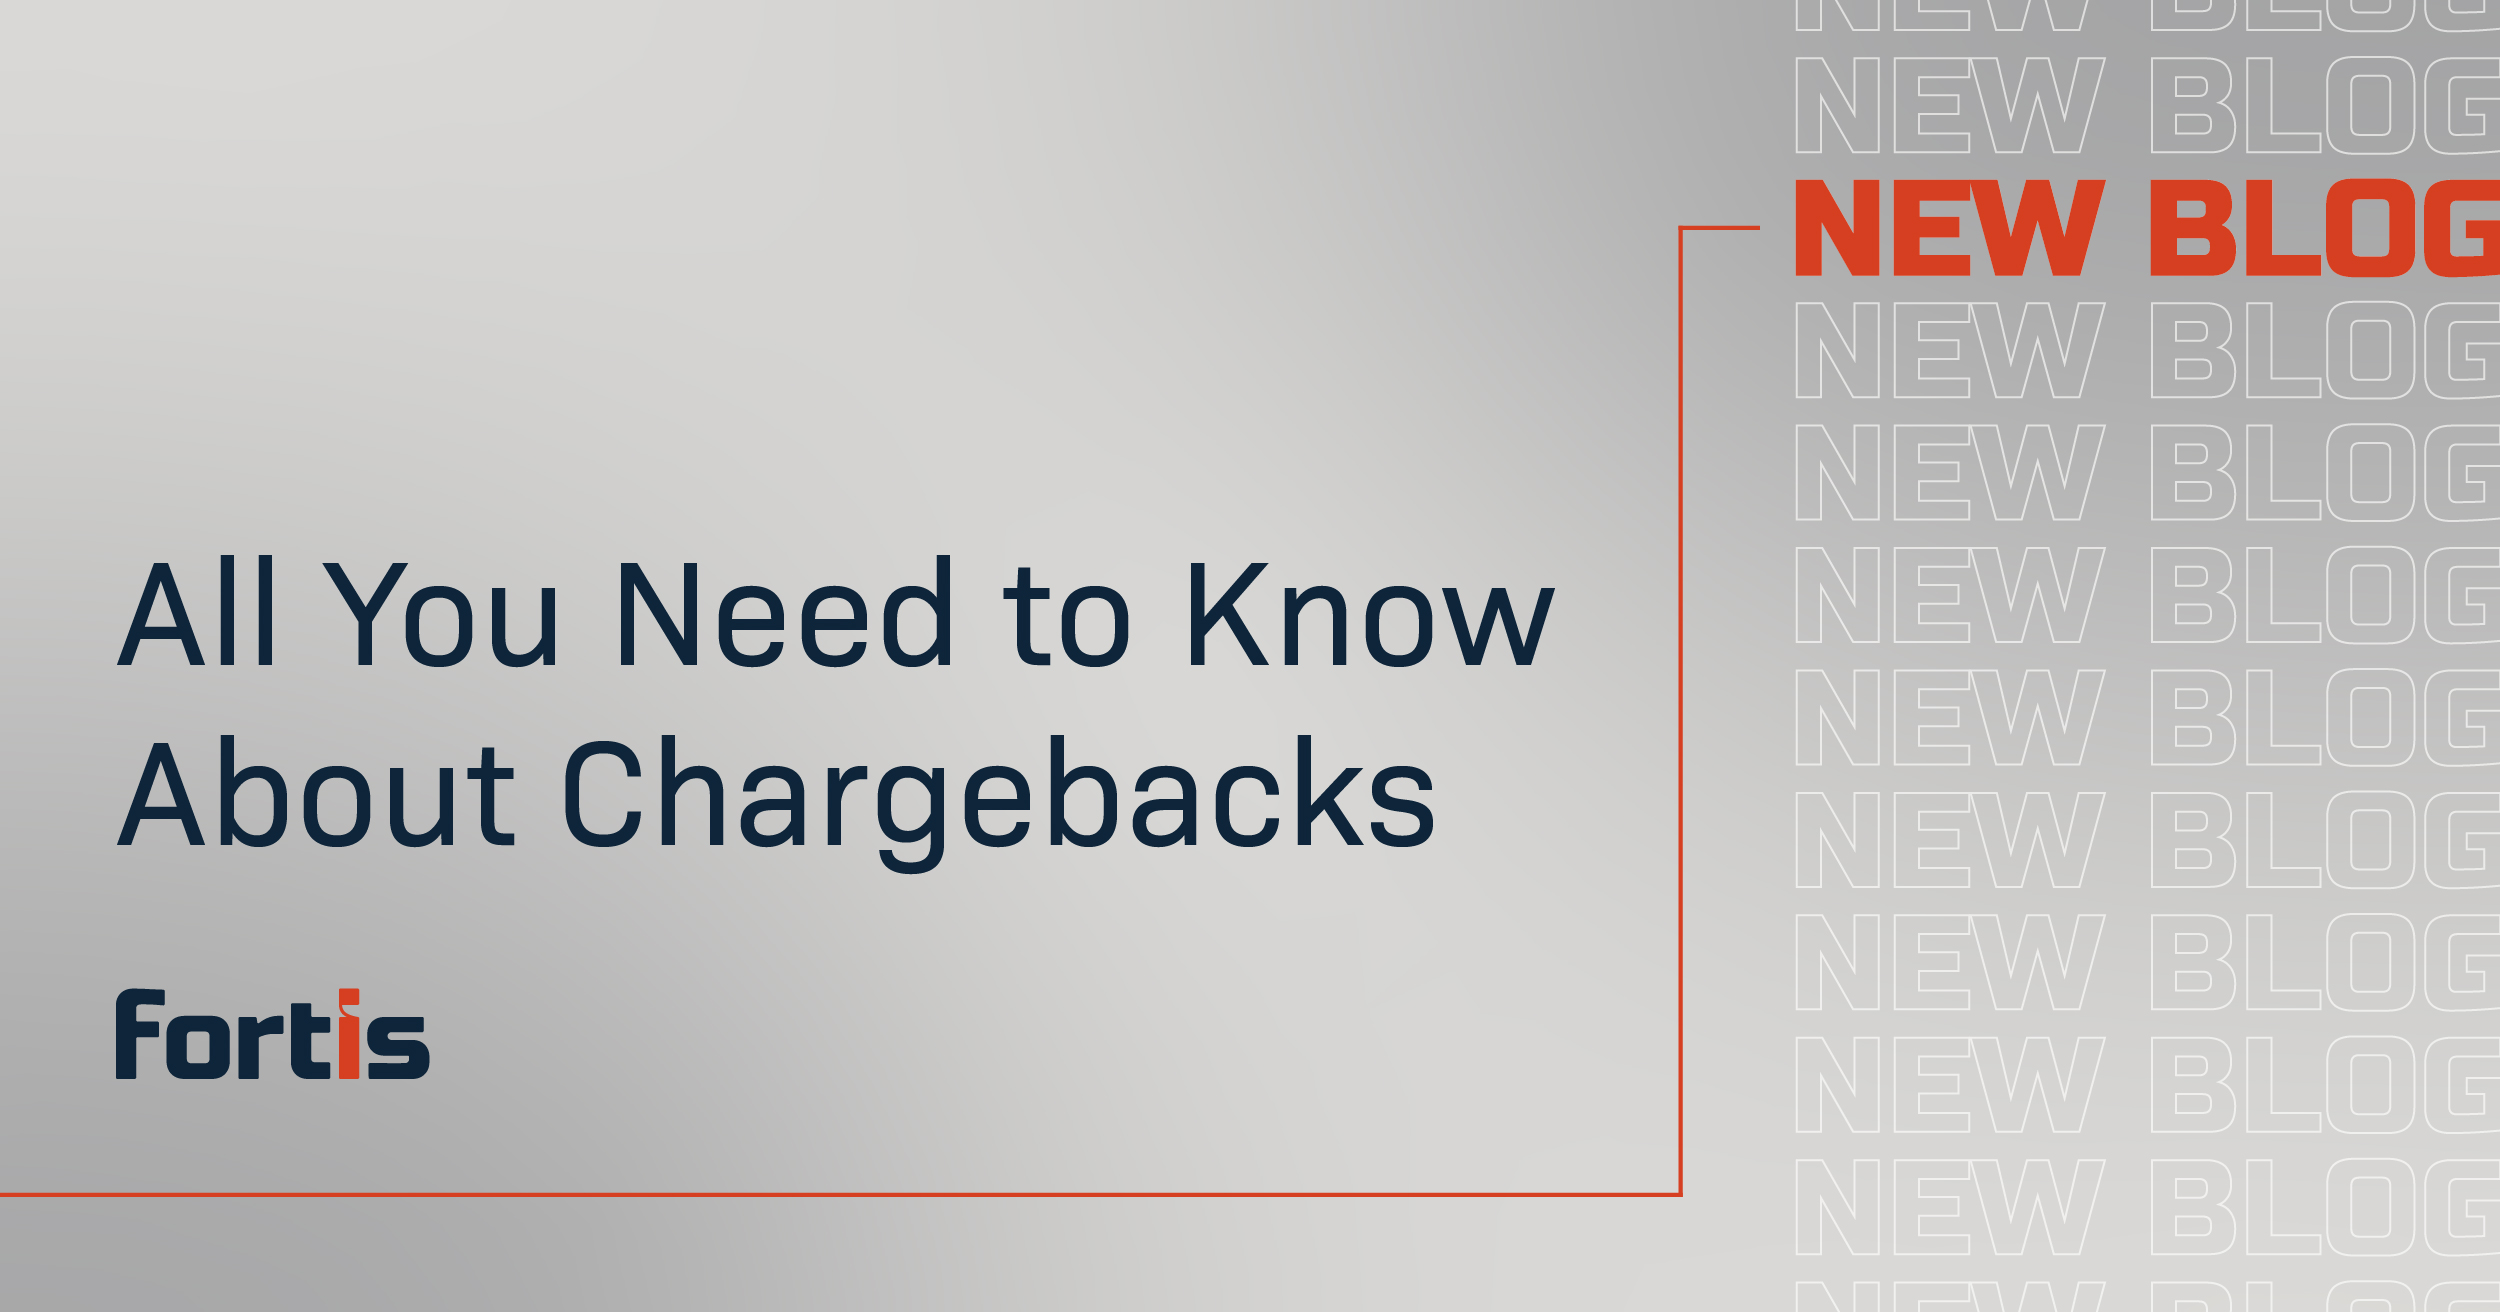 All You Need to Know About Chargebacks - Featured Image